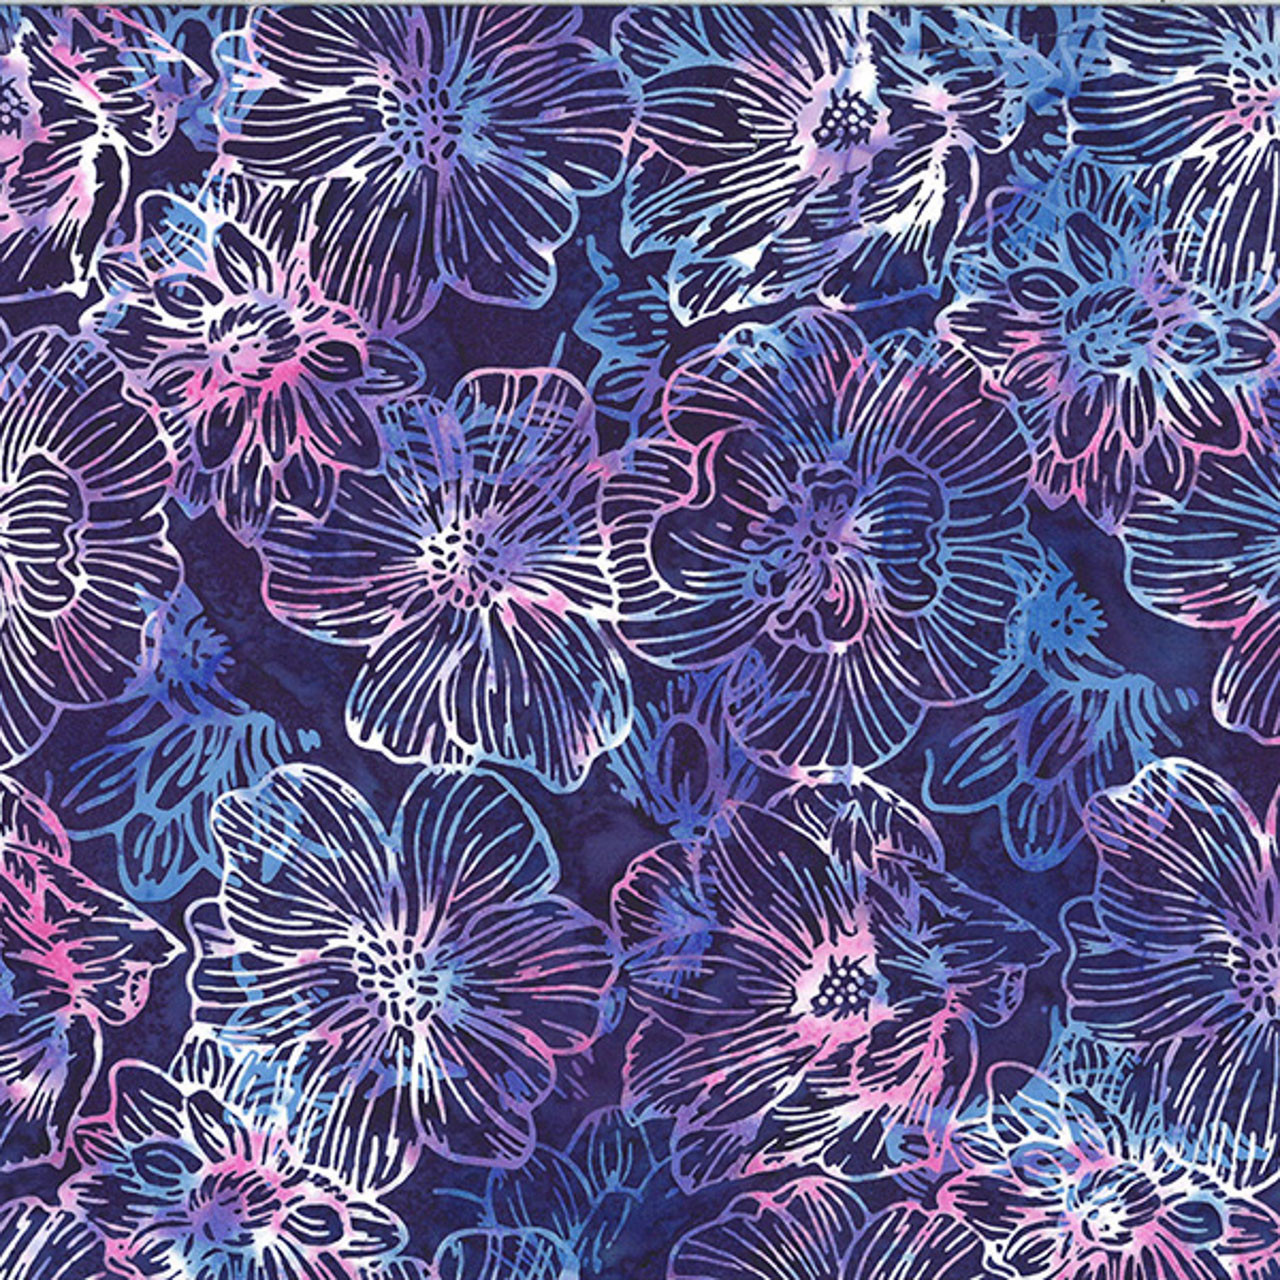 Hoffman Fabrics' Twilight Hibiscus Harmony batik fabric featuring indigo hibiscus flowers with pink and light blue accents.